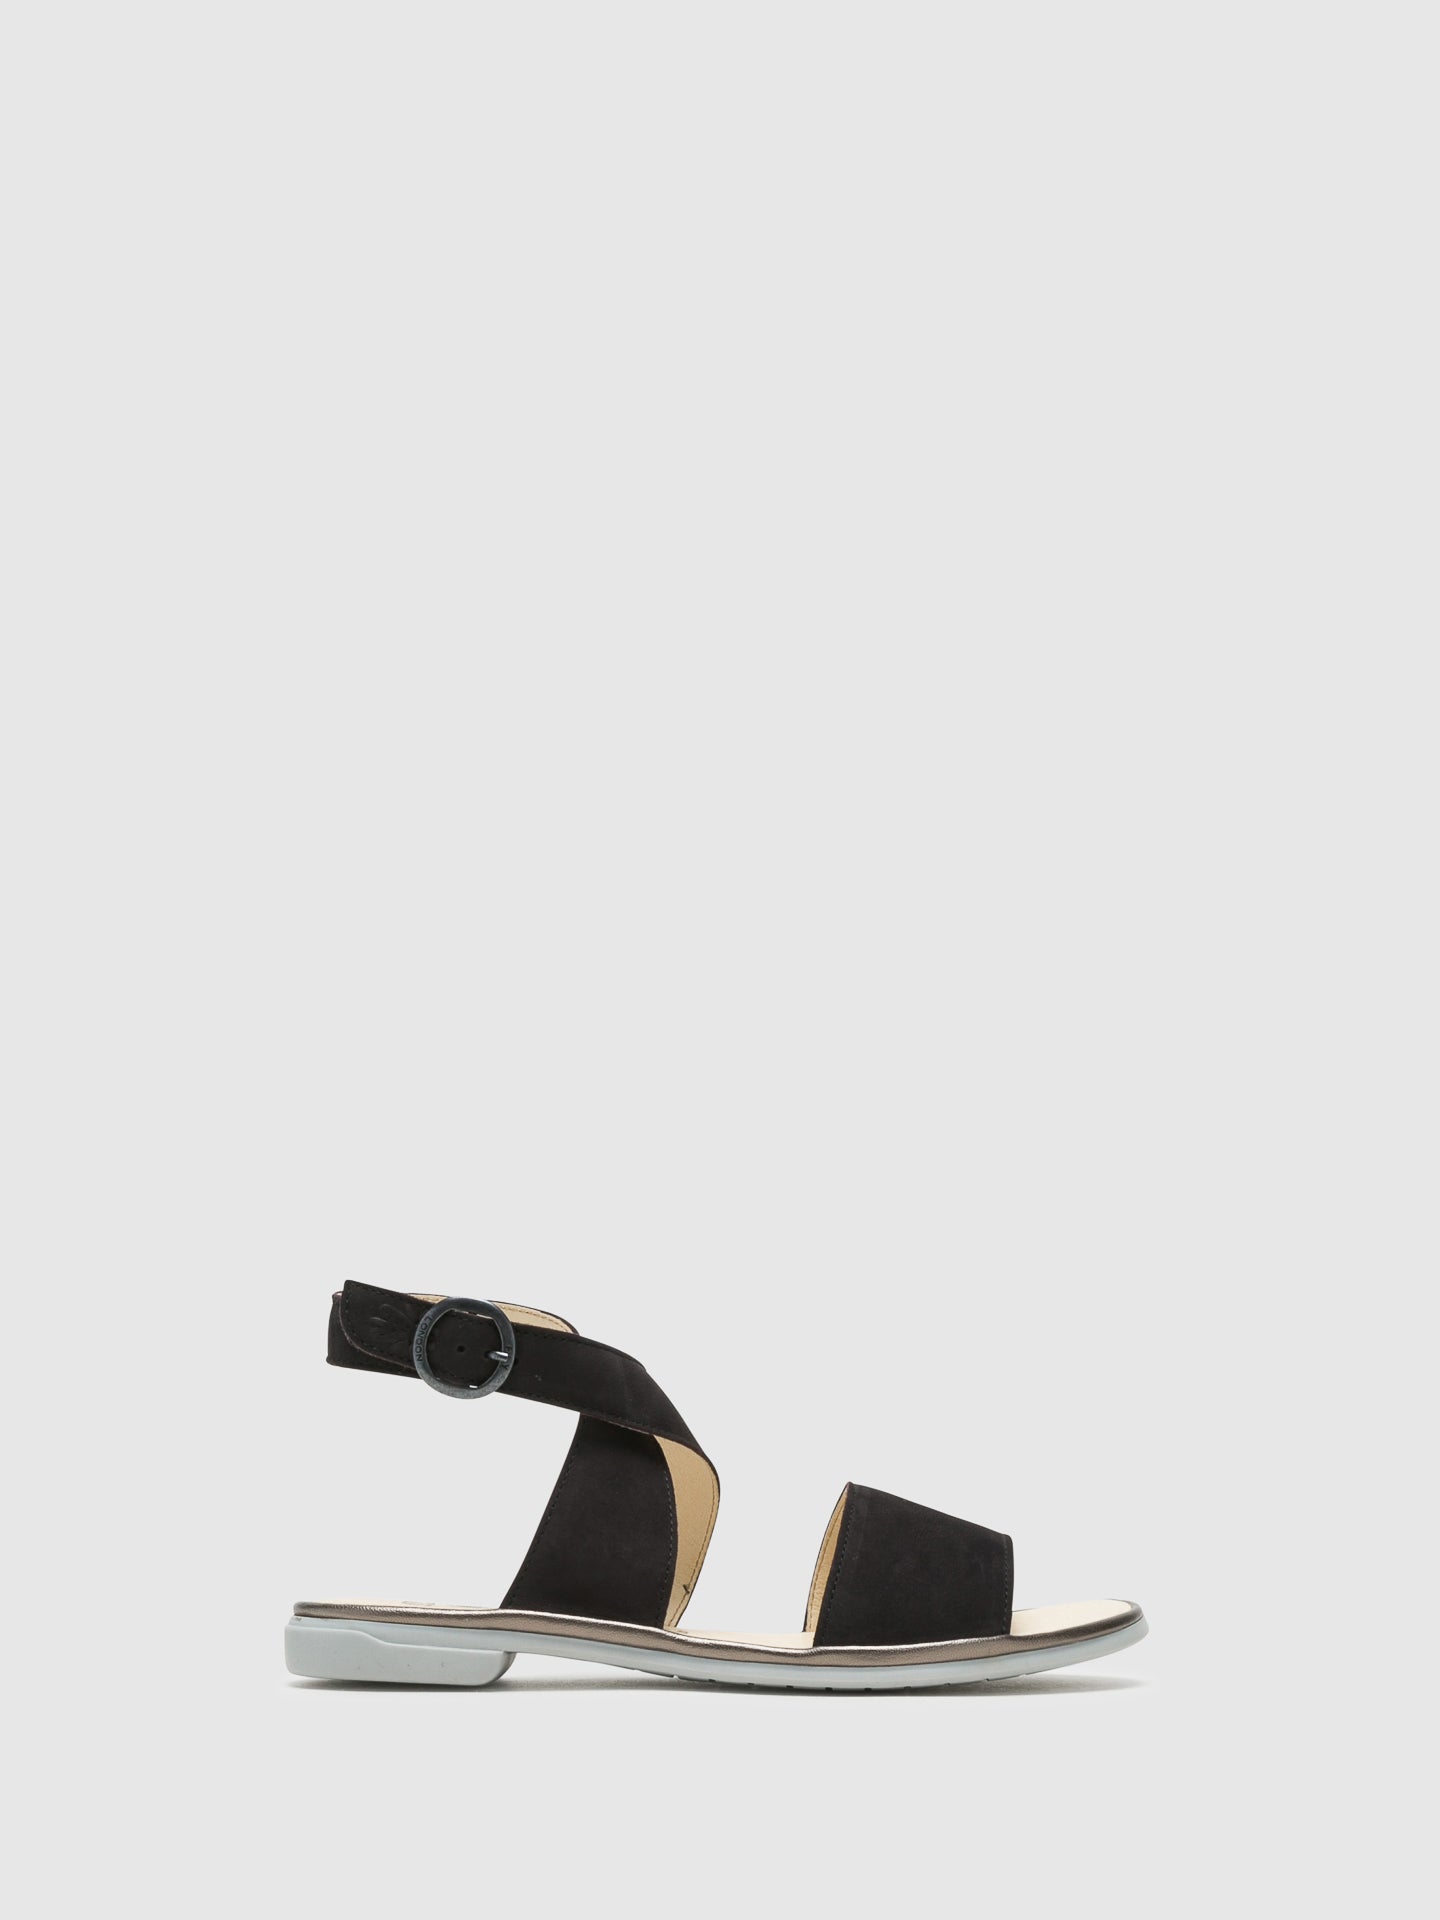 Fly London Buckle Sandals CLOP009FLY Black